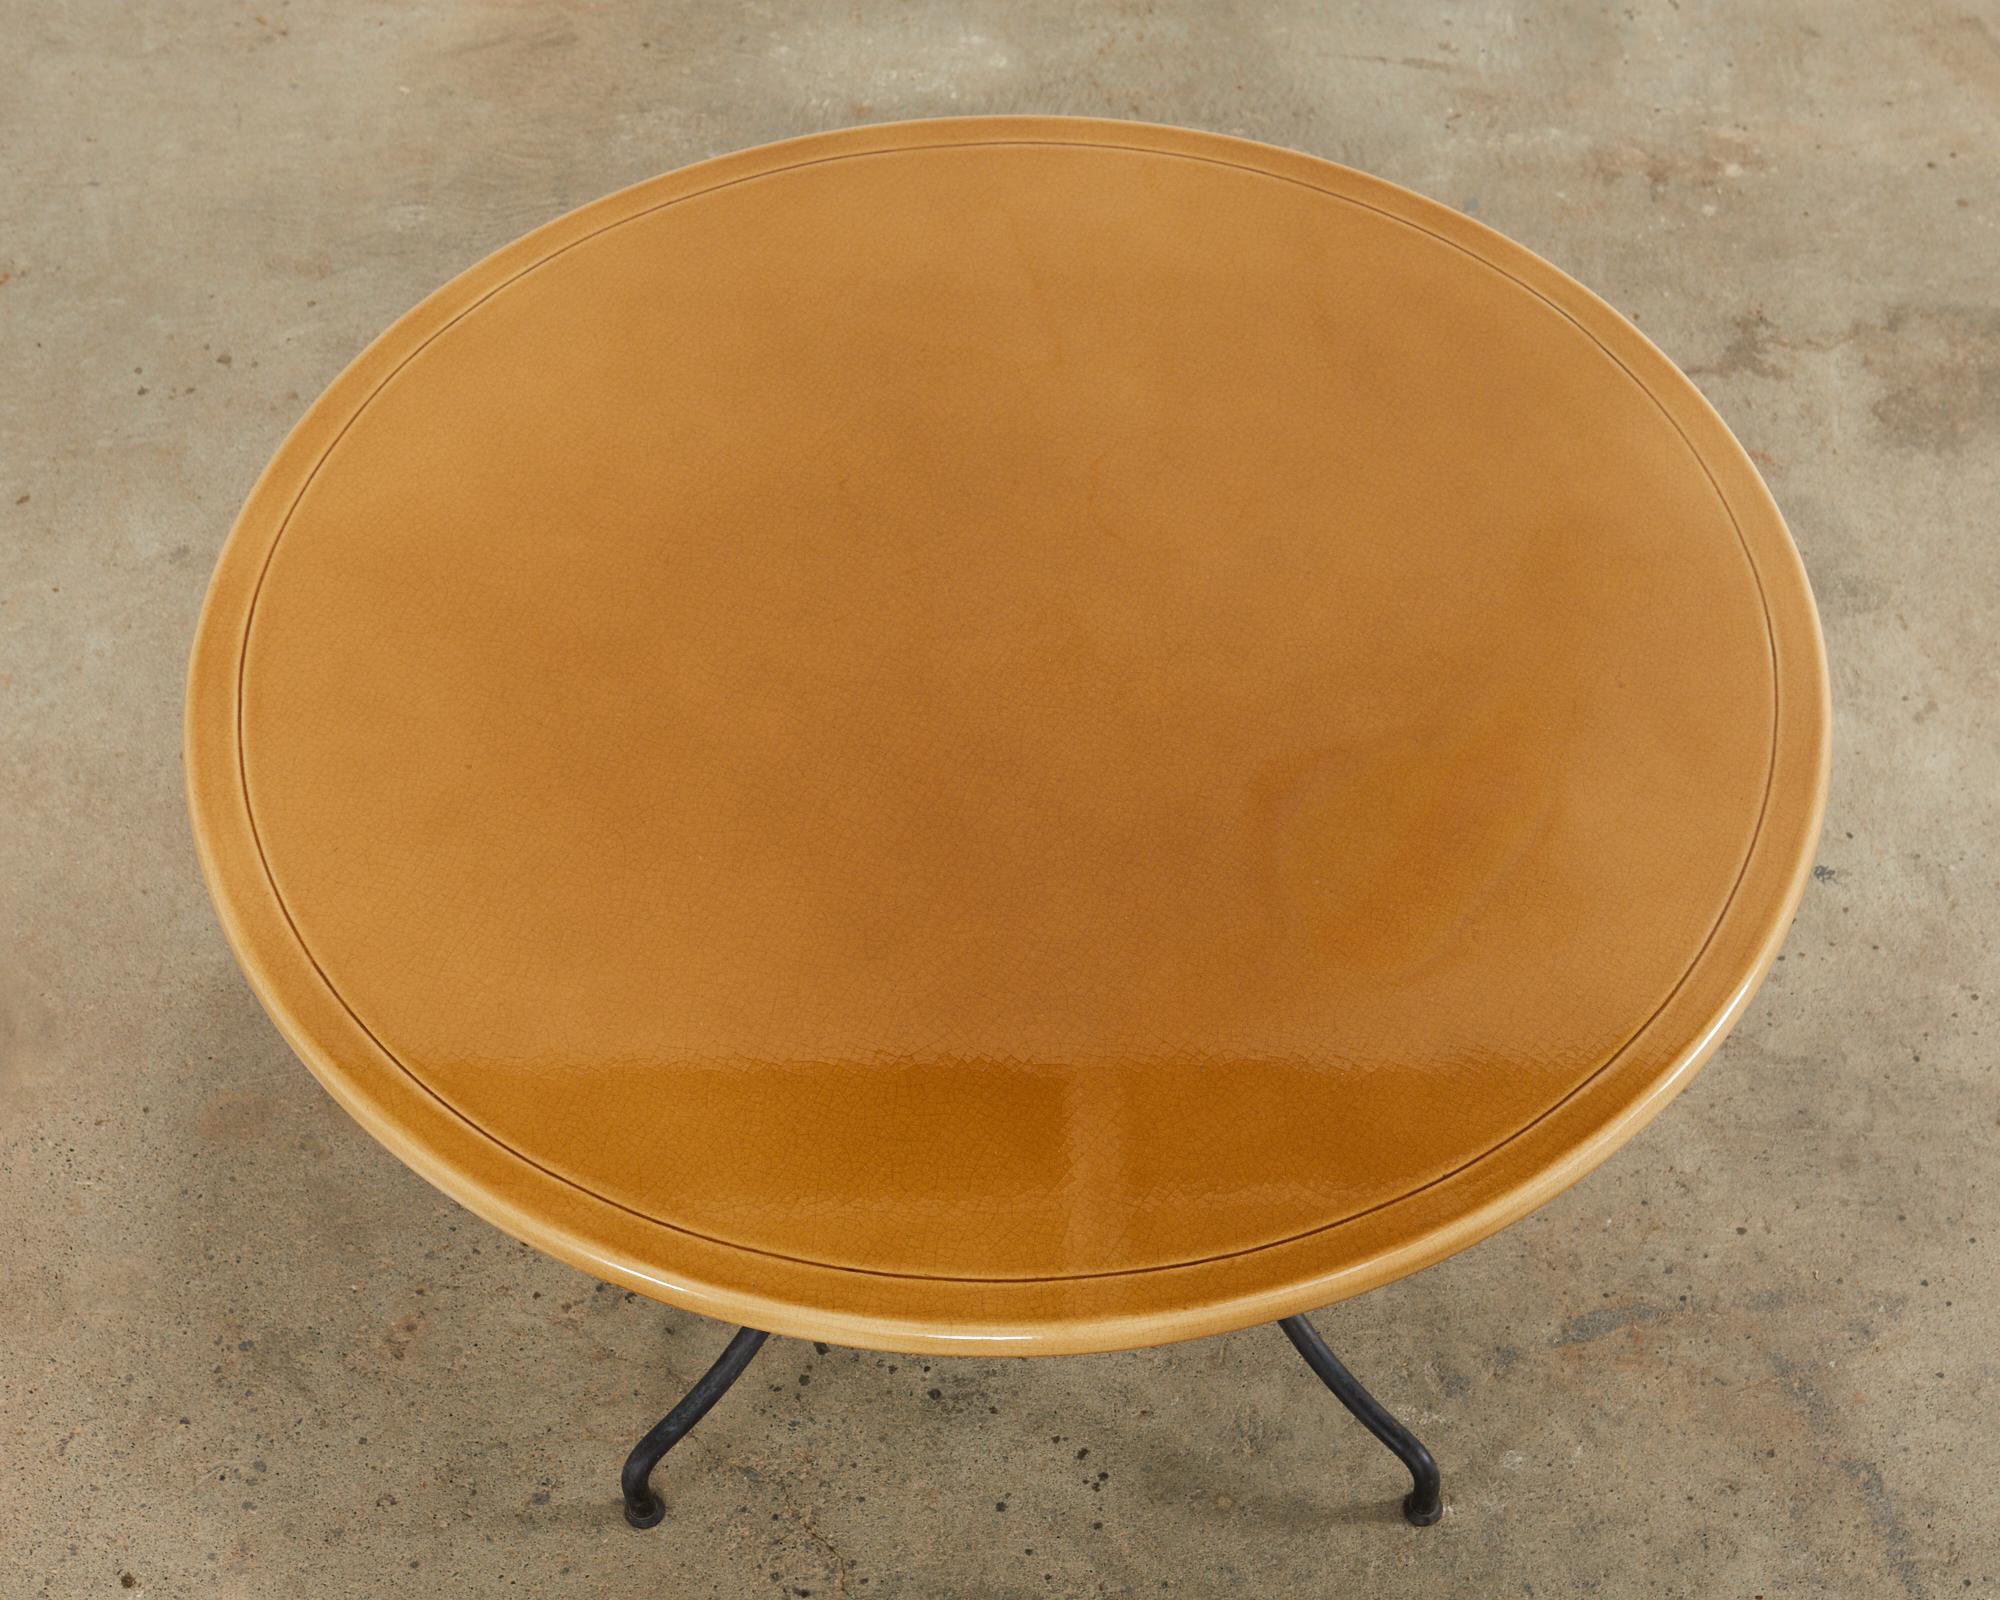 20th Century French Enameled Lava Stone Top Garden Dining Table For Sale